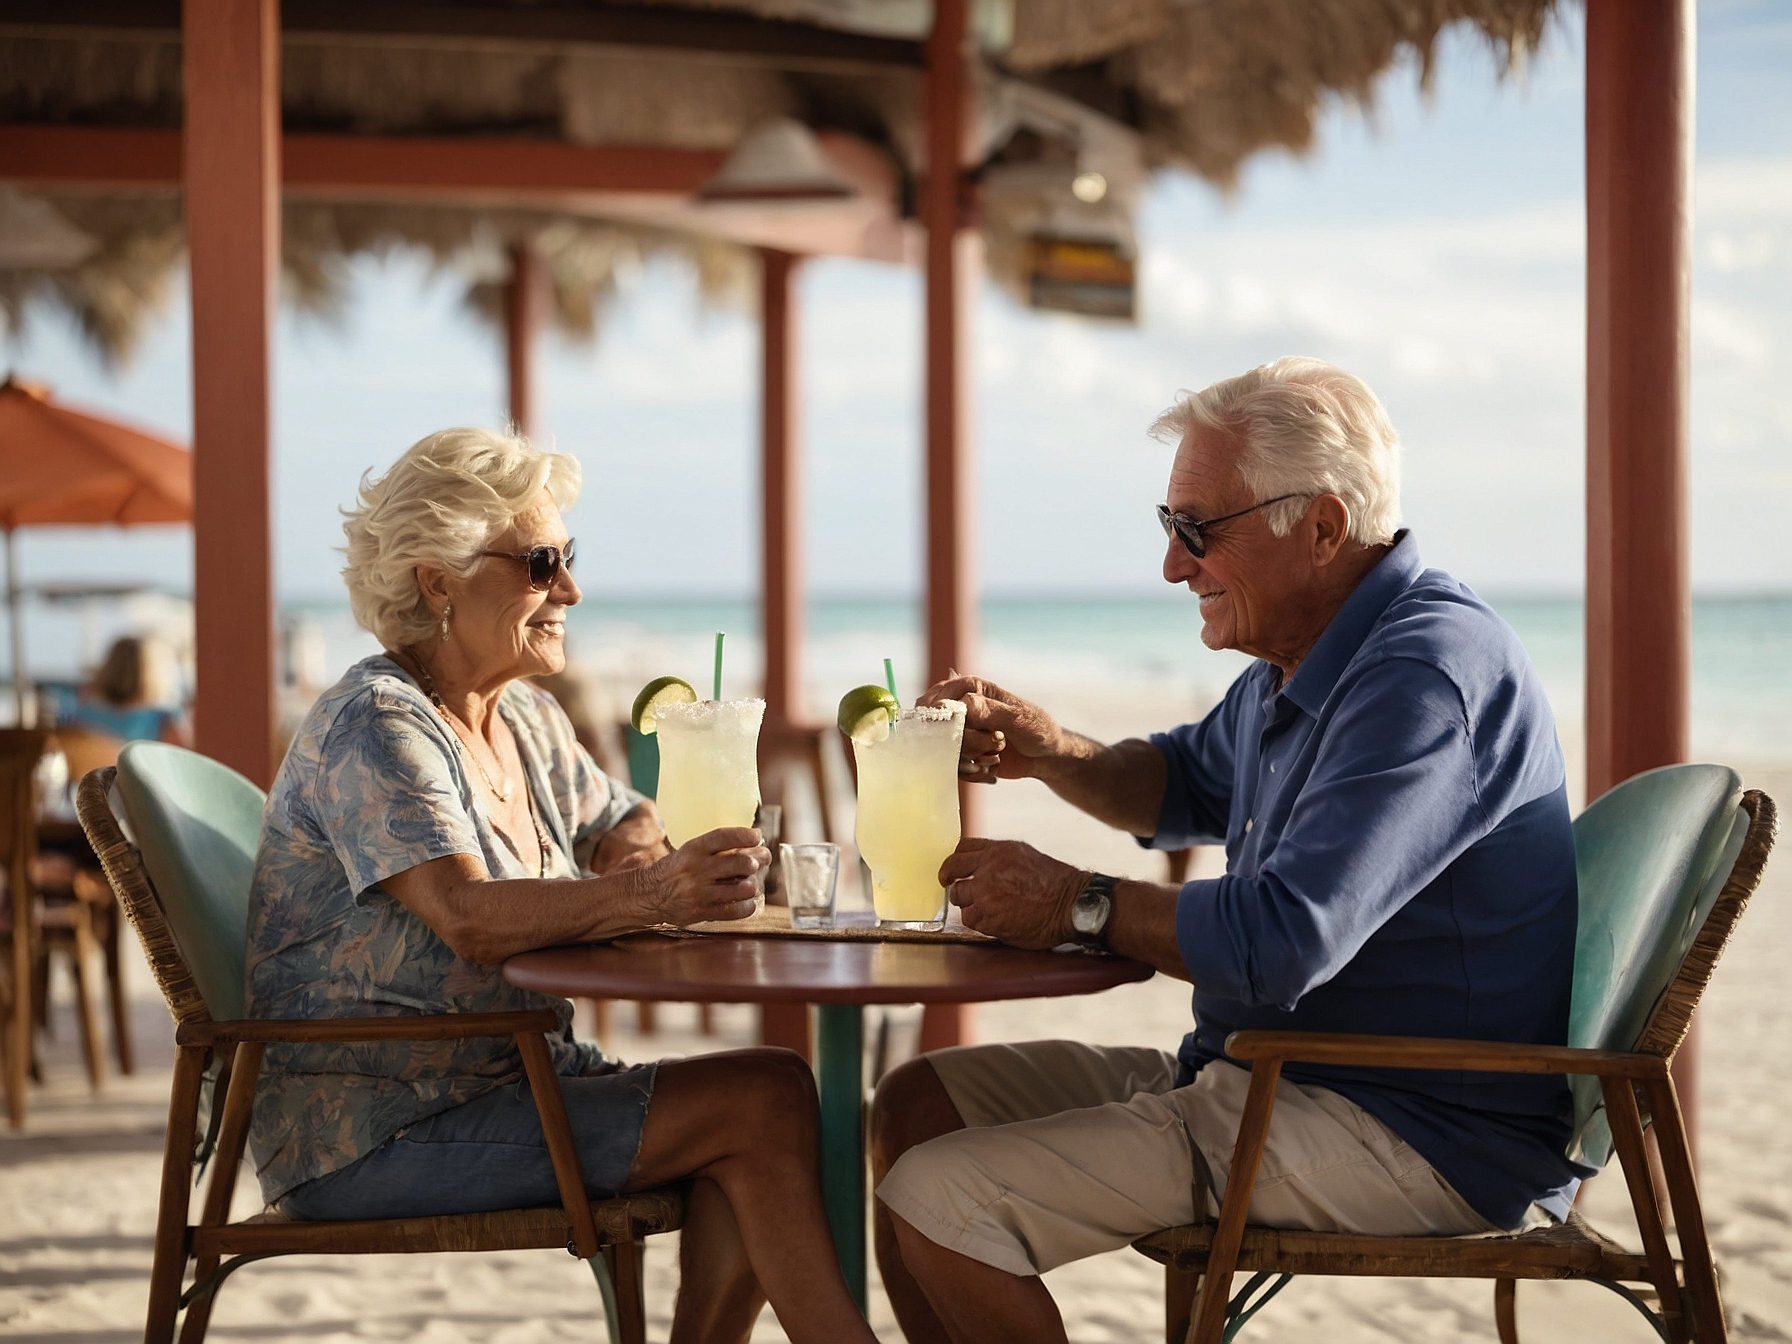 2 people retiring in mexico